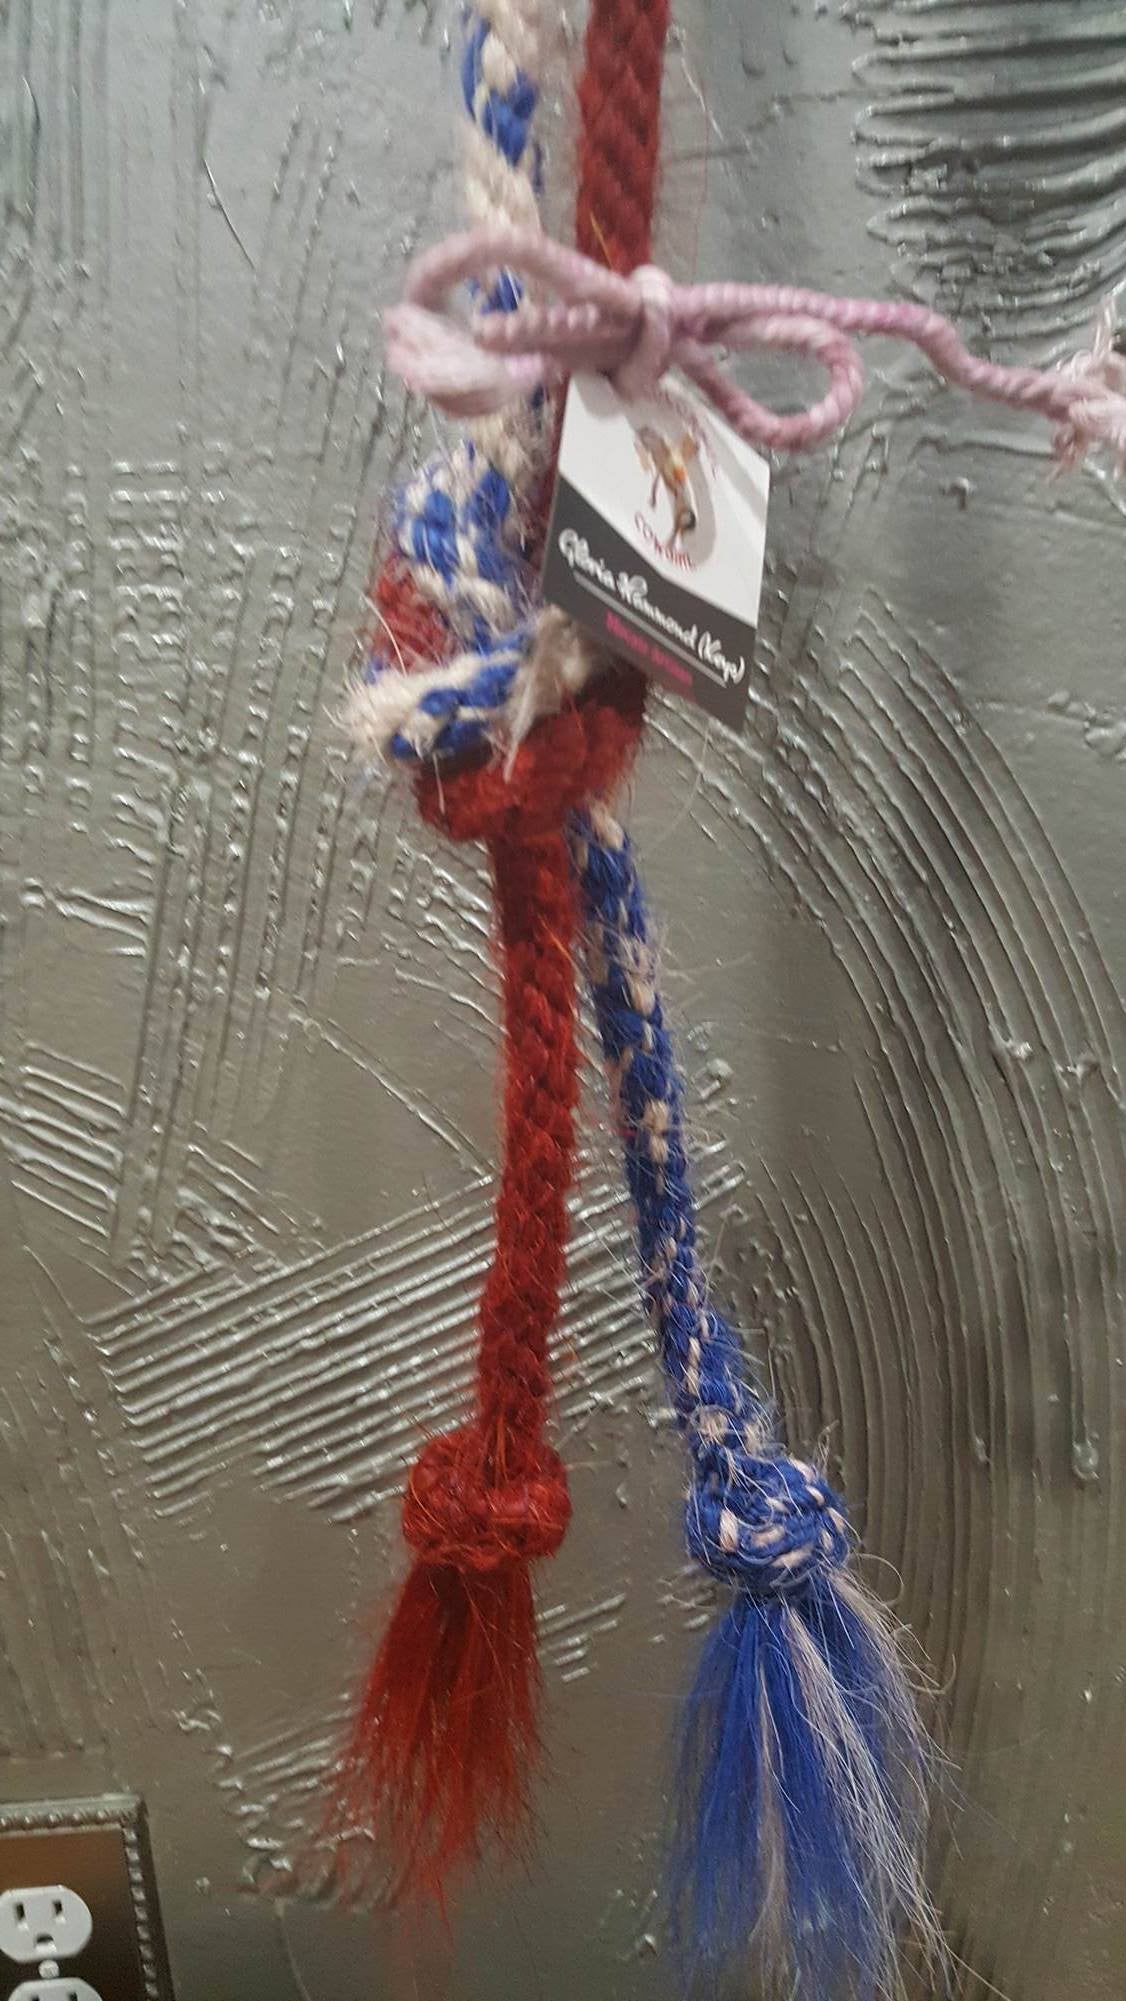 5/8" x 9' mane hair adjustable liberty rein/bridle-less neck rein in red, white, and blue ombre